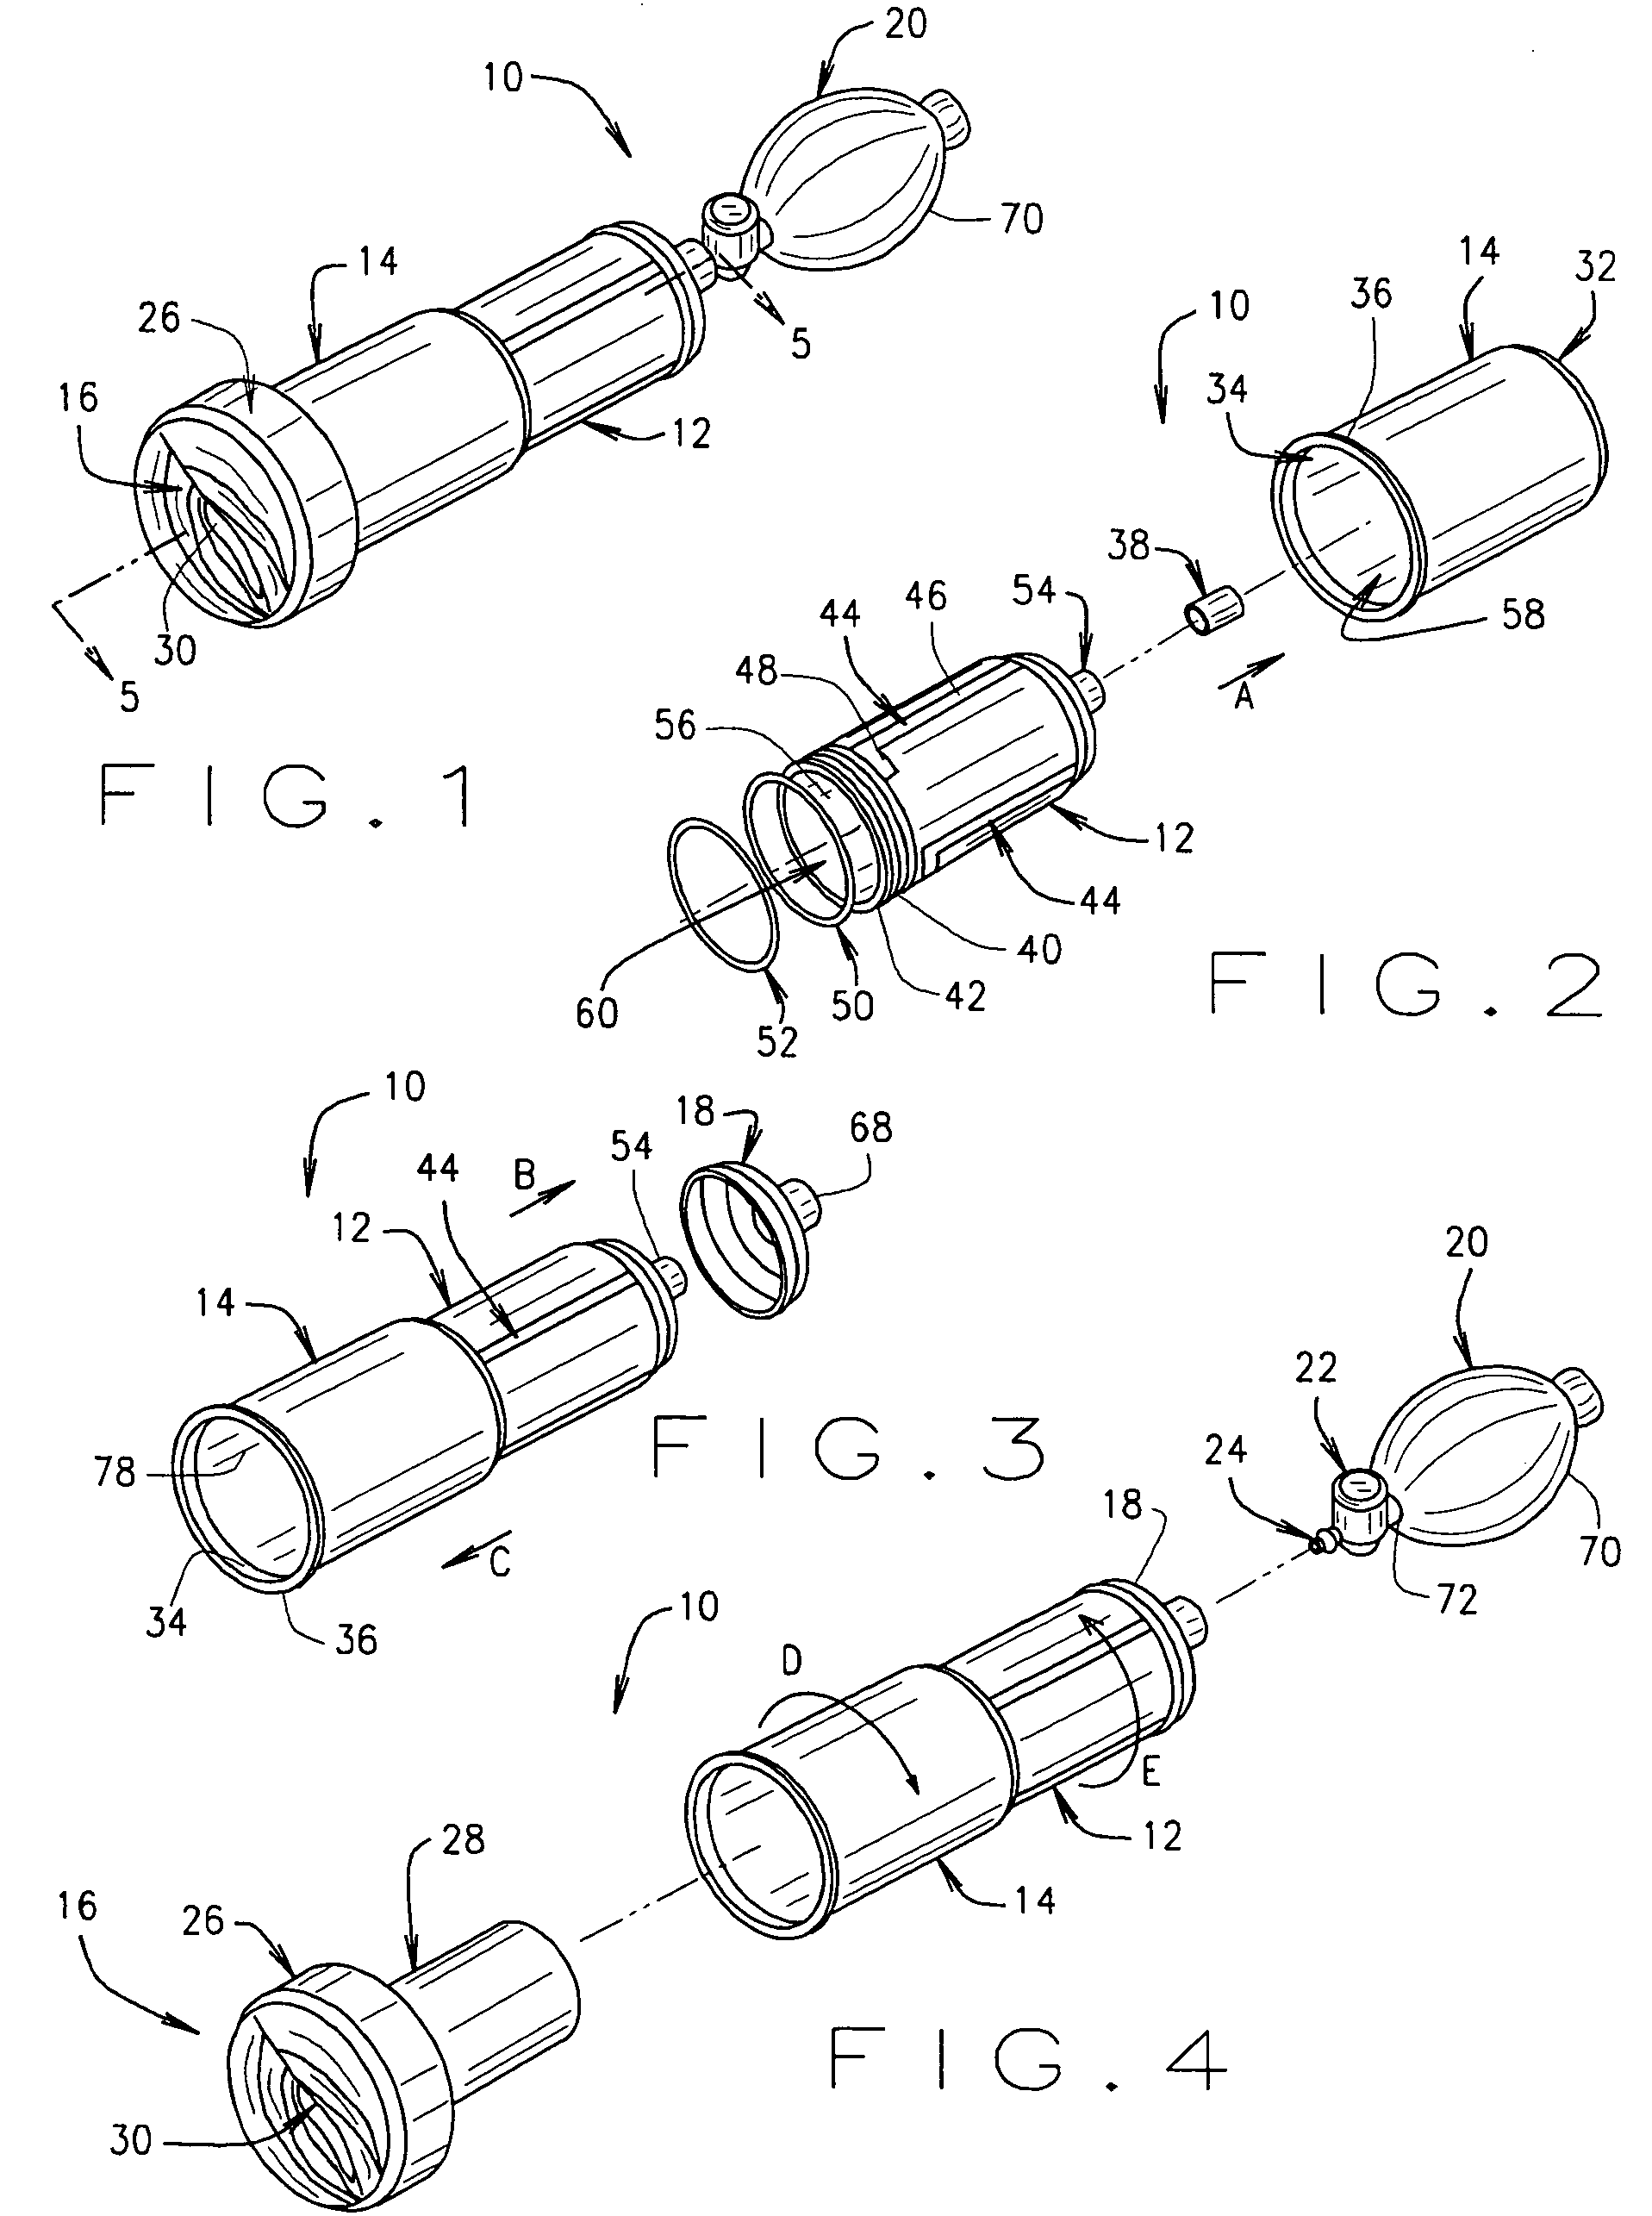 Collapsible vacuum device